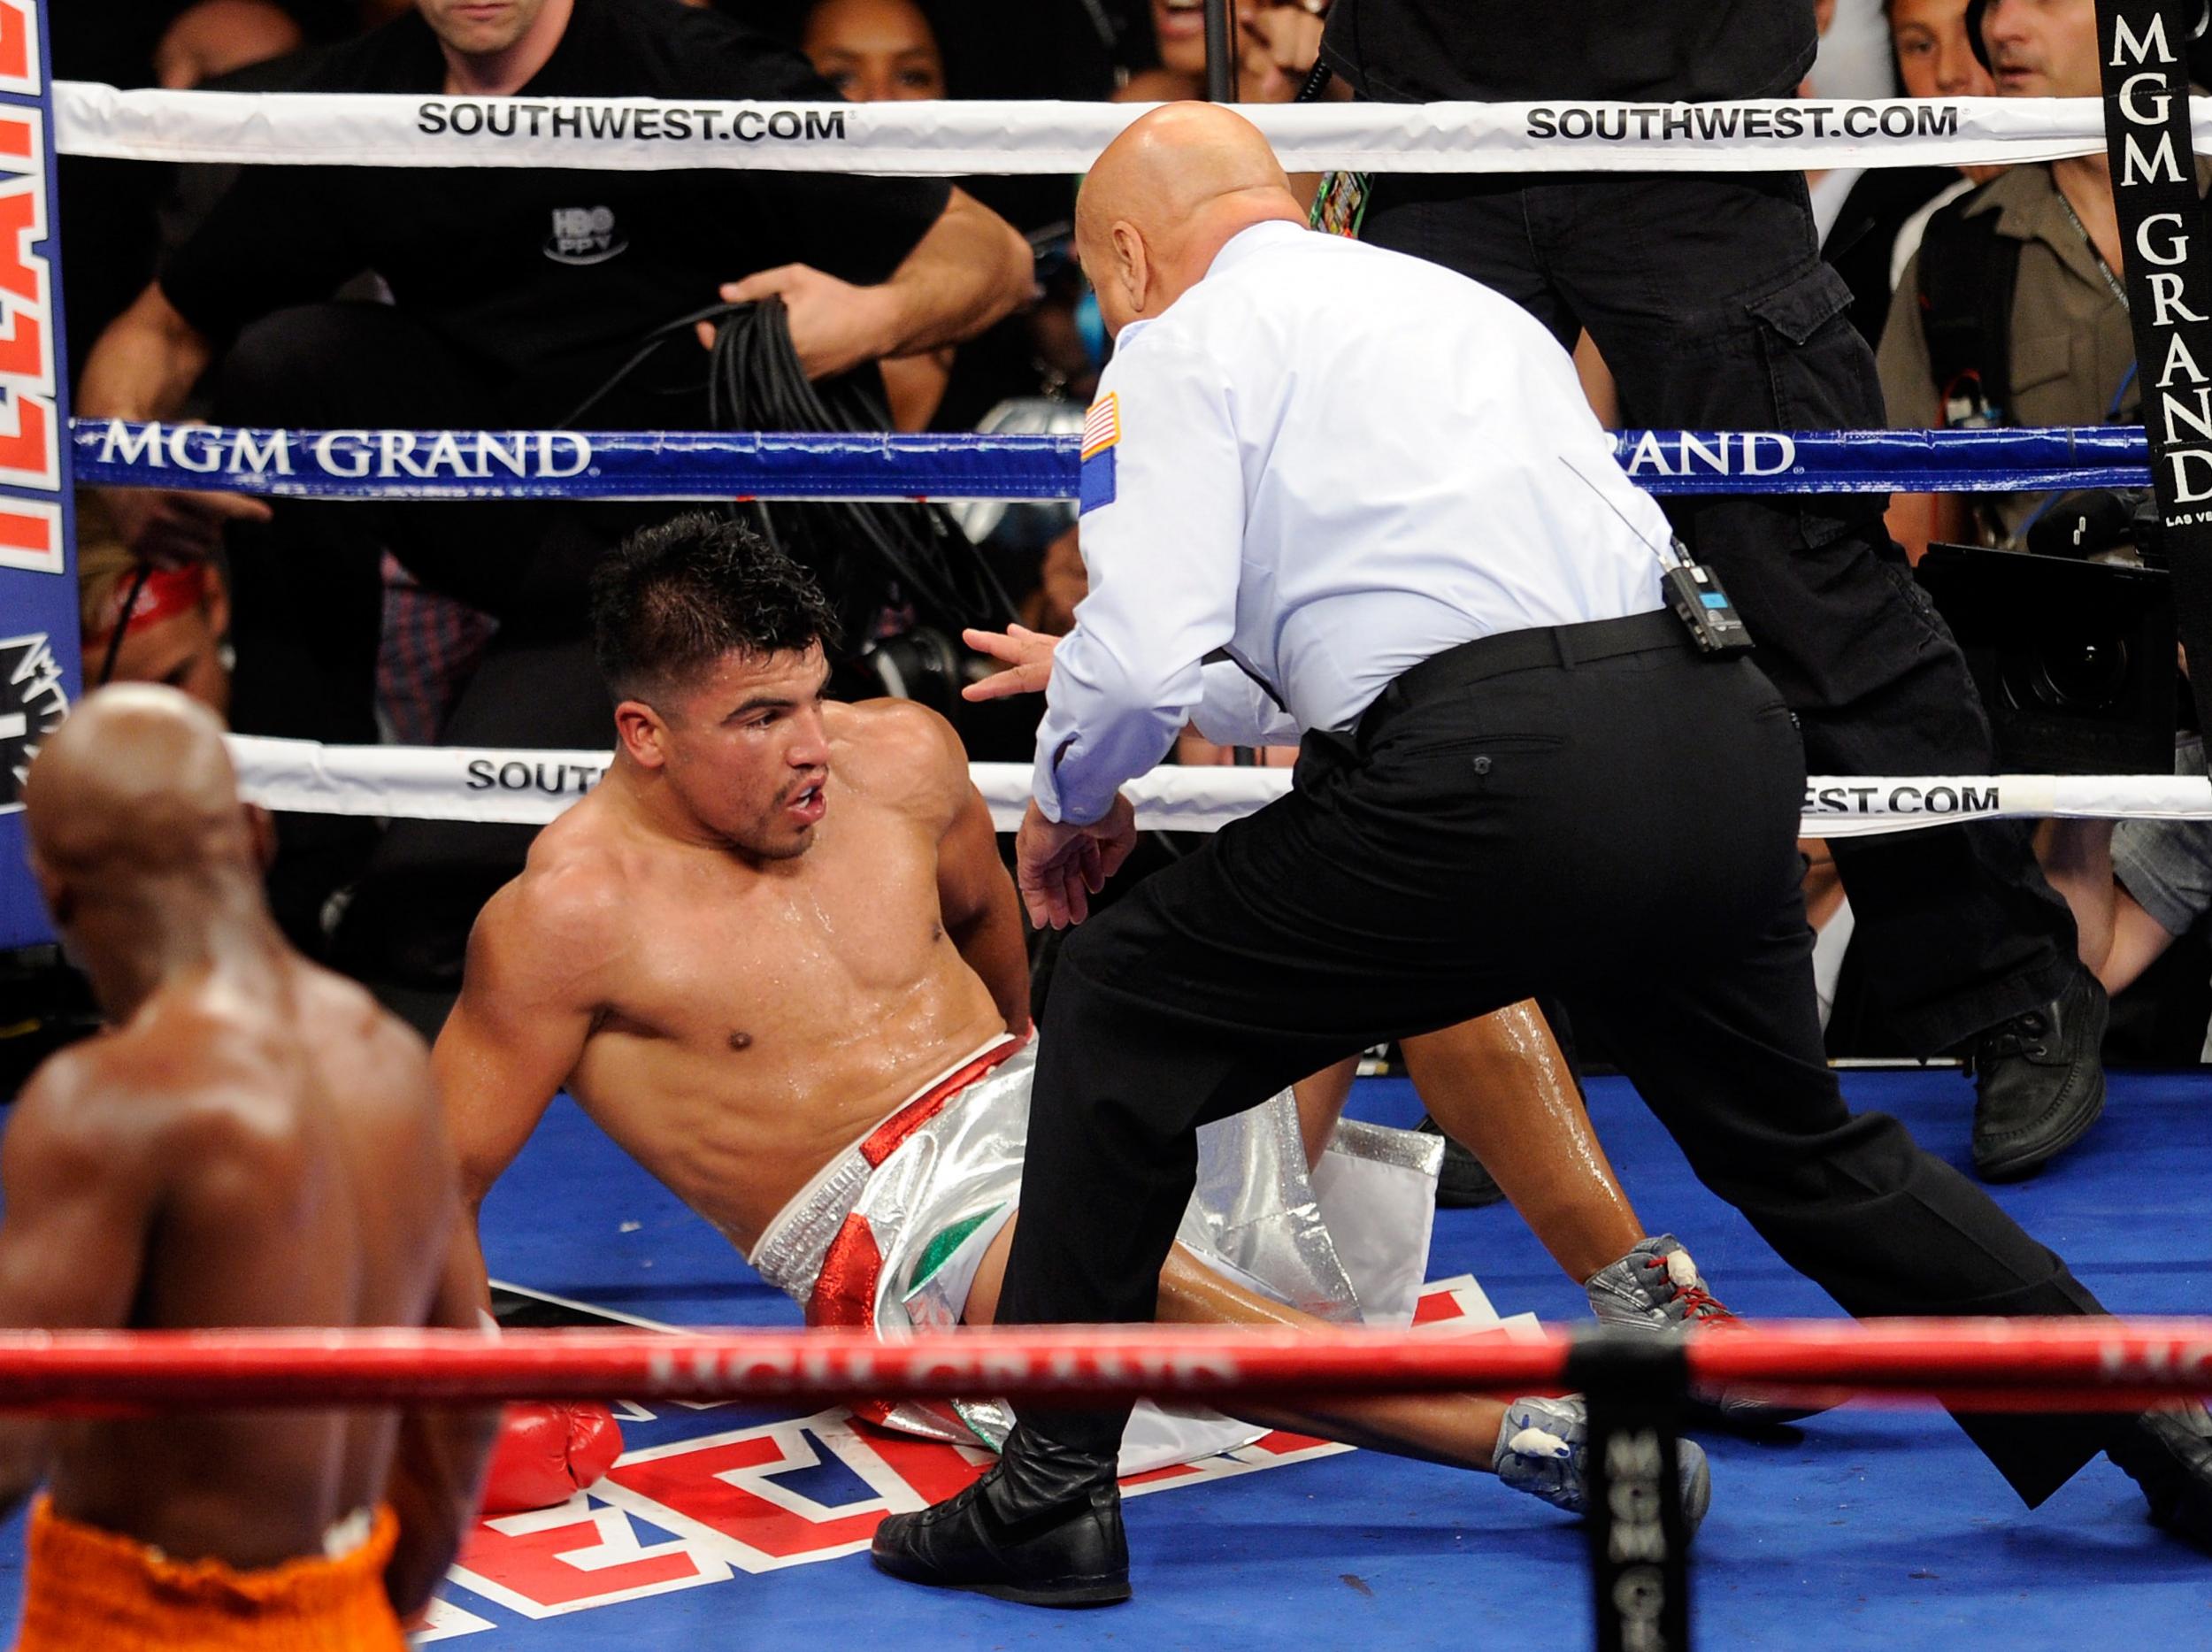 Cortez presided over Mayweather's controversial win over Ortiz, in 2011